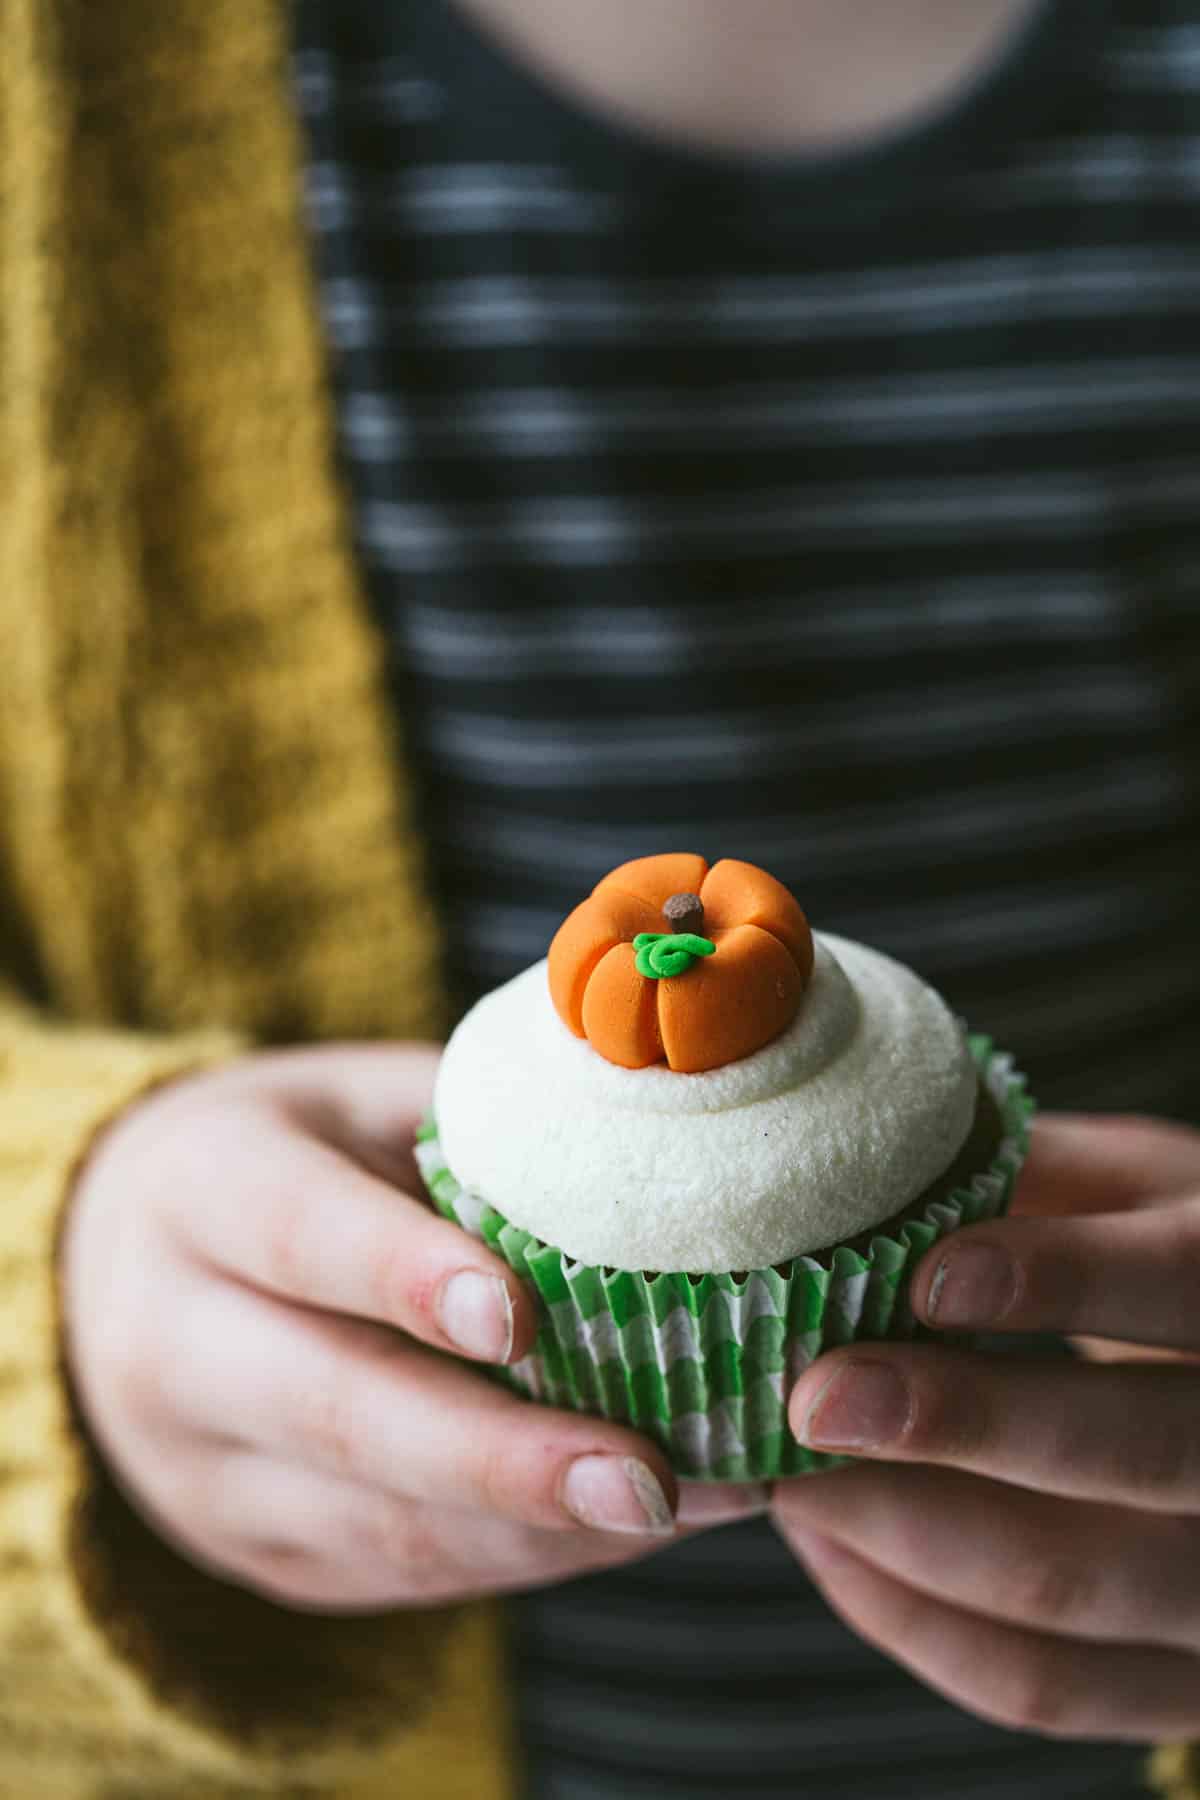 Little girl holding a cupcakes with a pumpkin topper.